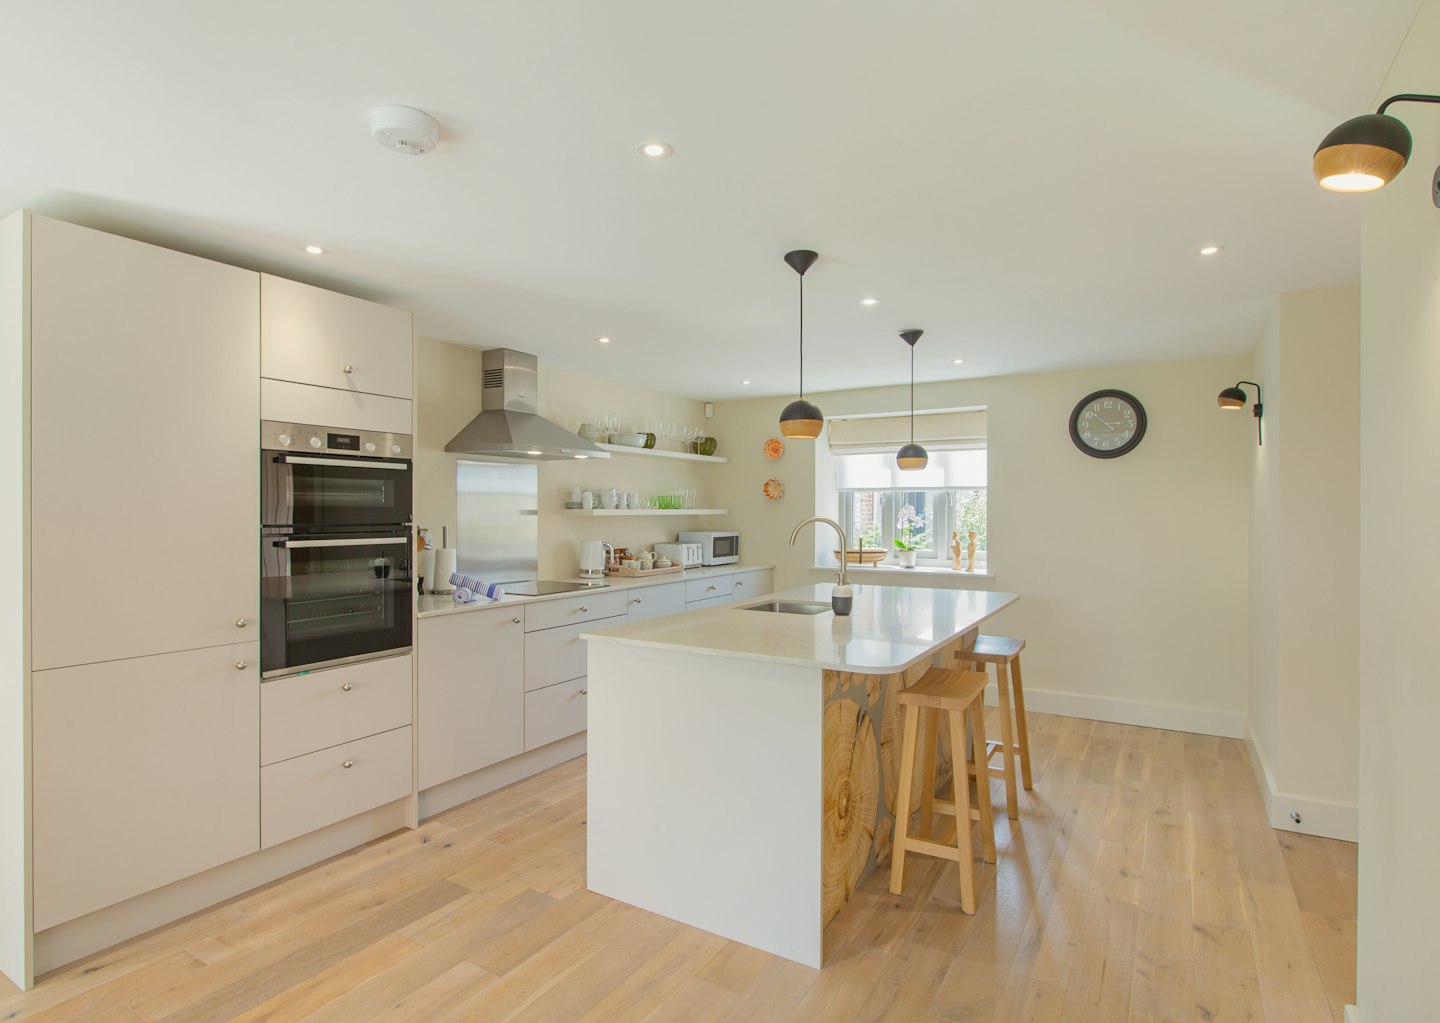 Open-plan kitchen, The Wood Store, Starr Holiday Homes